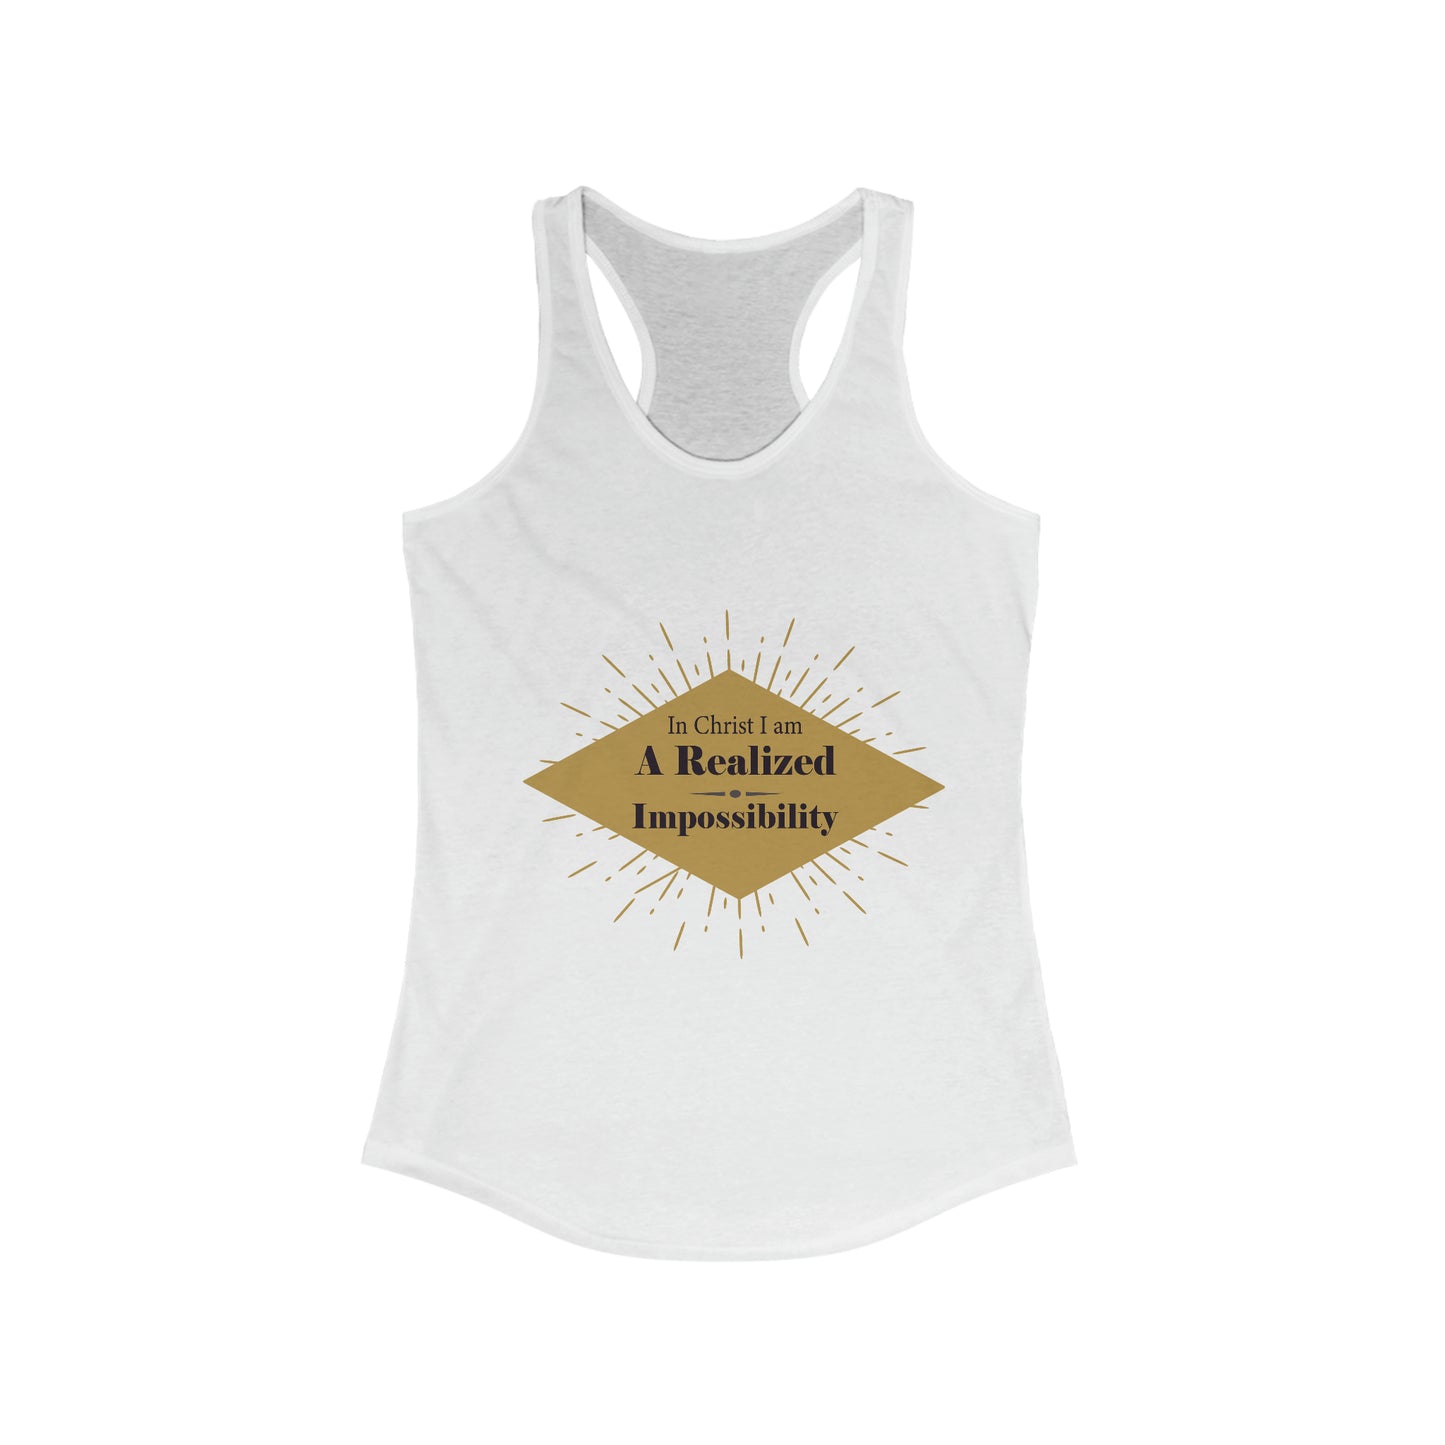 In Christ I Am A Realized Impossibility Women’s Slim fit tank-top